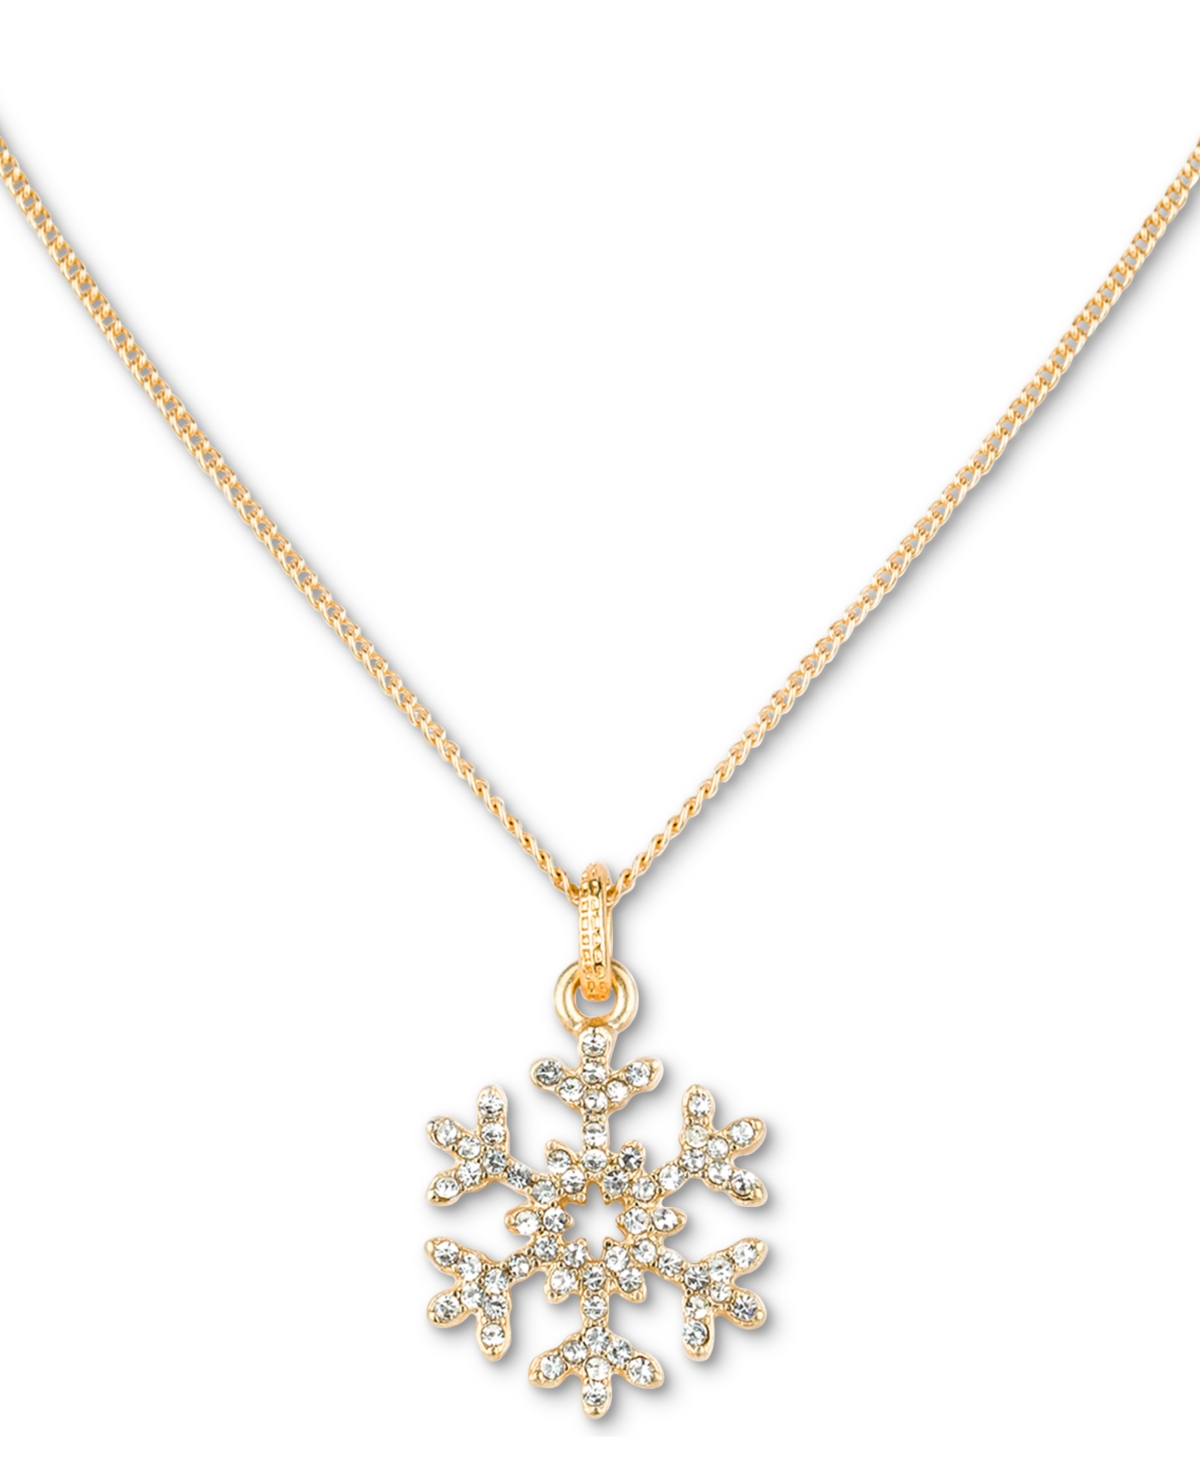 Patricia Nash Gold-tone Pave Snowflake Pendant Necklace, 17" + 3" Extender In Med Yellow